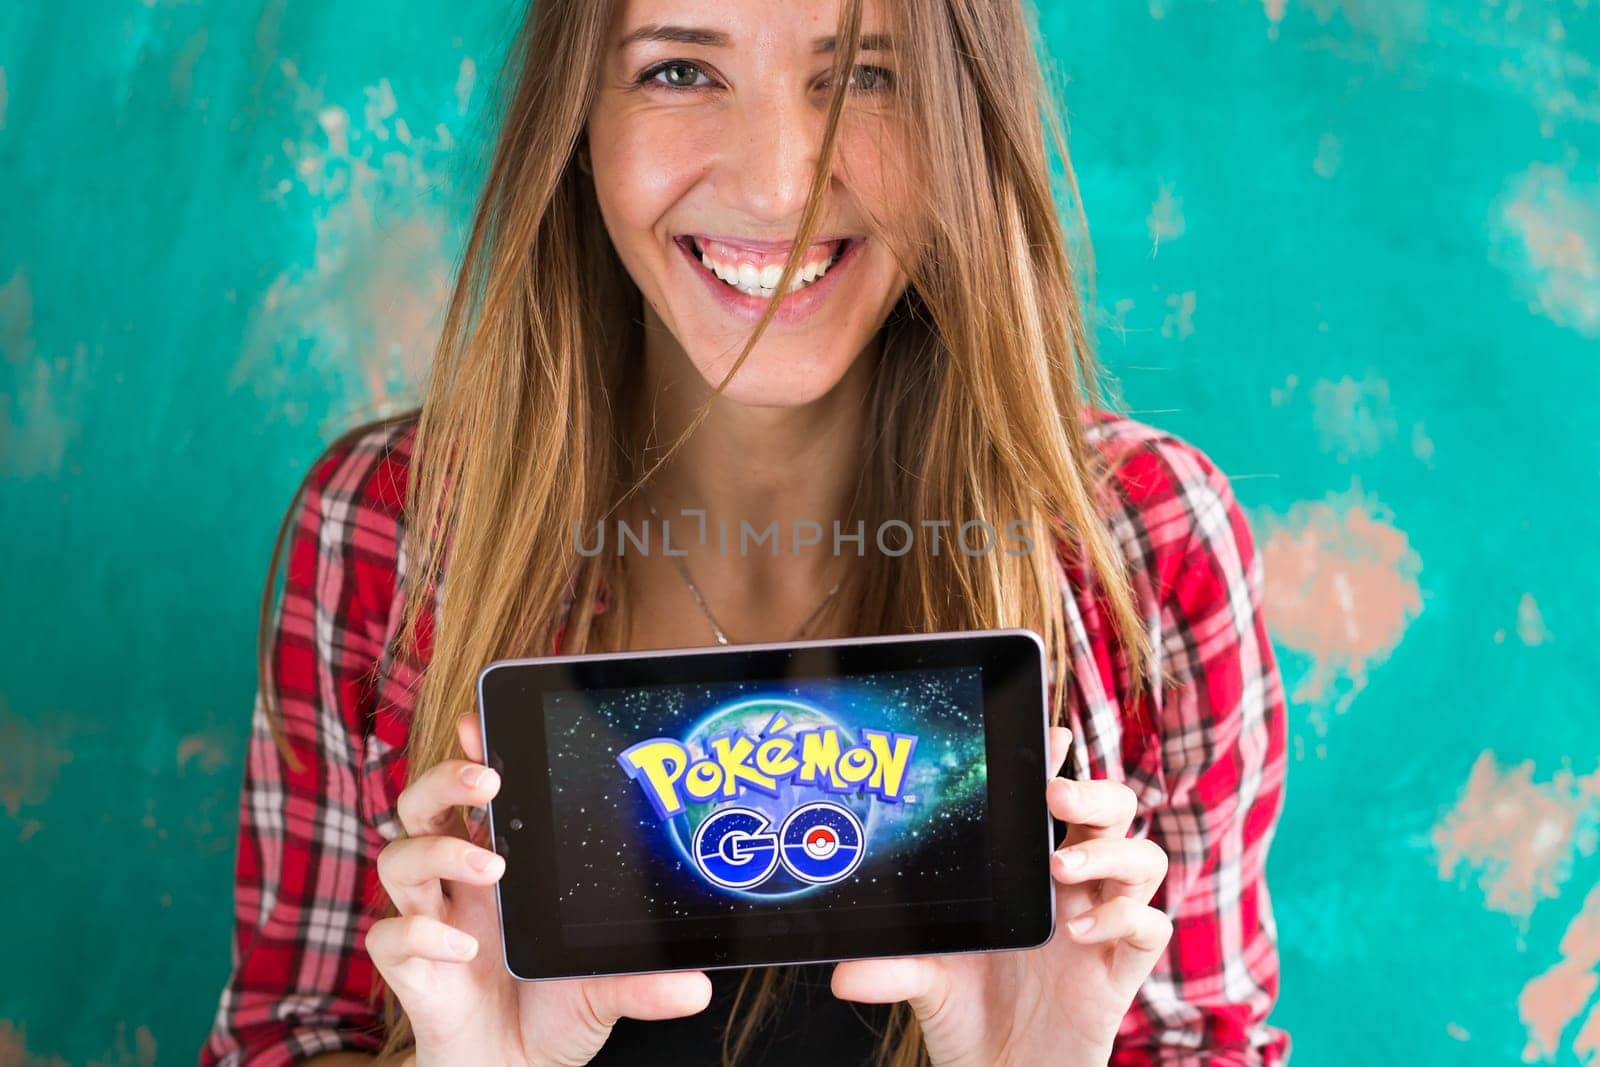 Ufa, Russia. - July 29: Woman show the tablet with Pokemon Go logo, July 29, 2016 in Ufa, Russia by Satura86